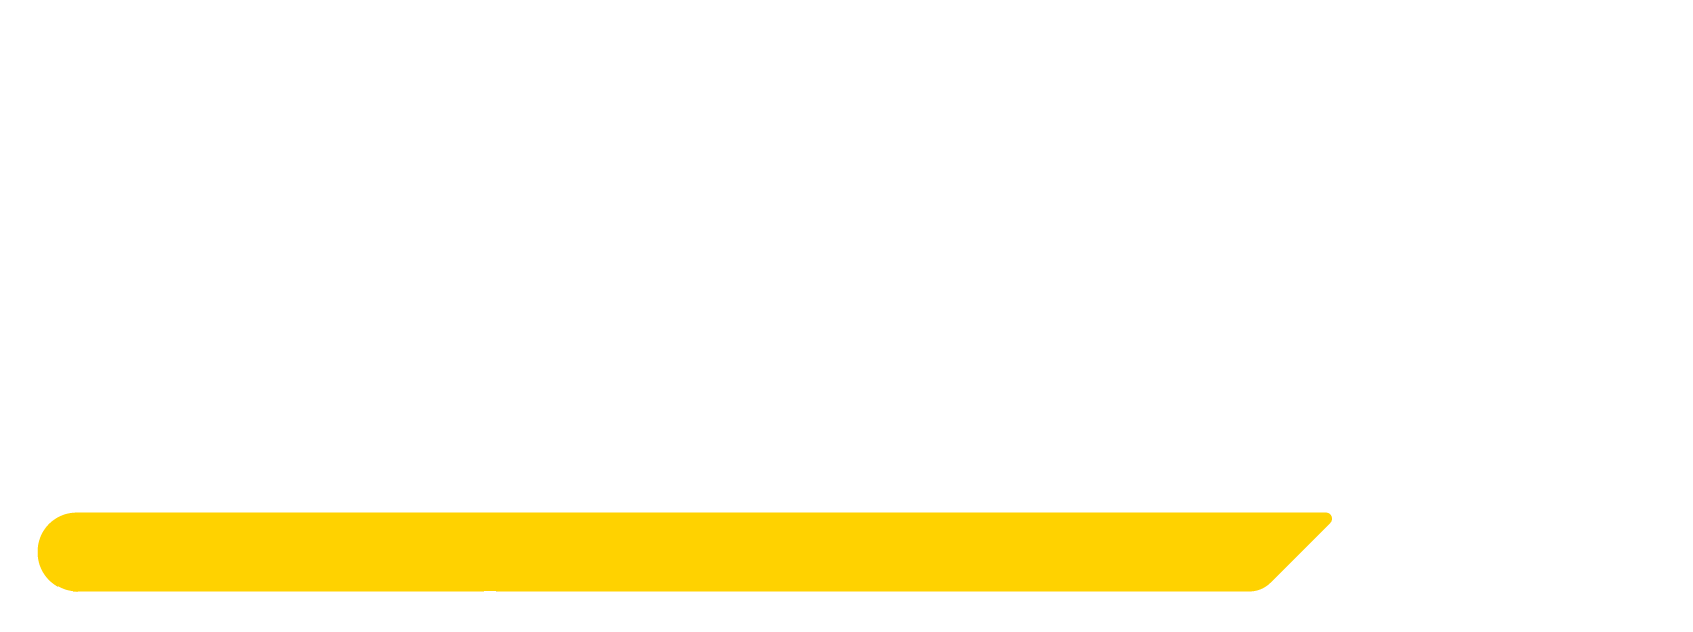 Small Business Resilience